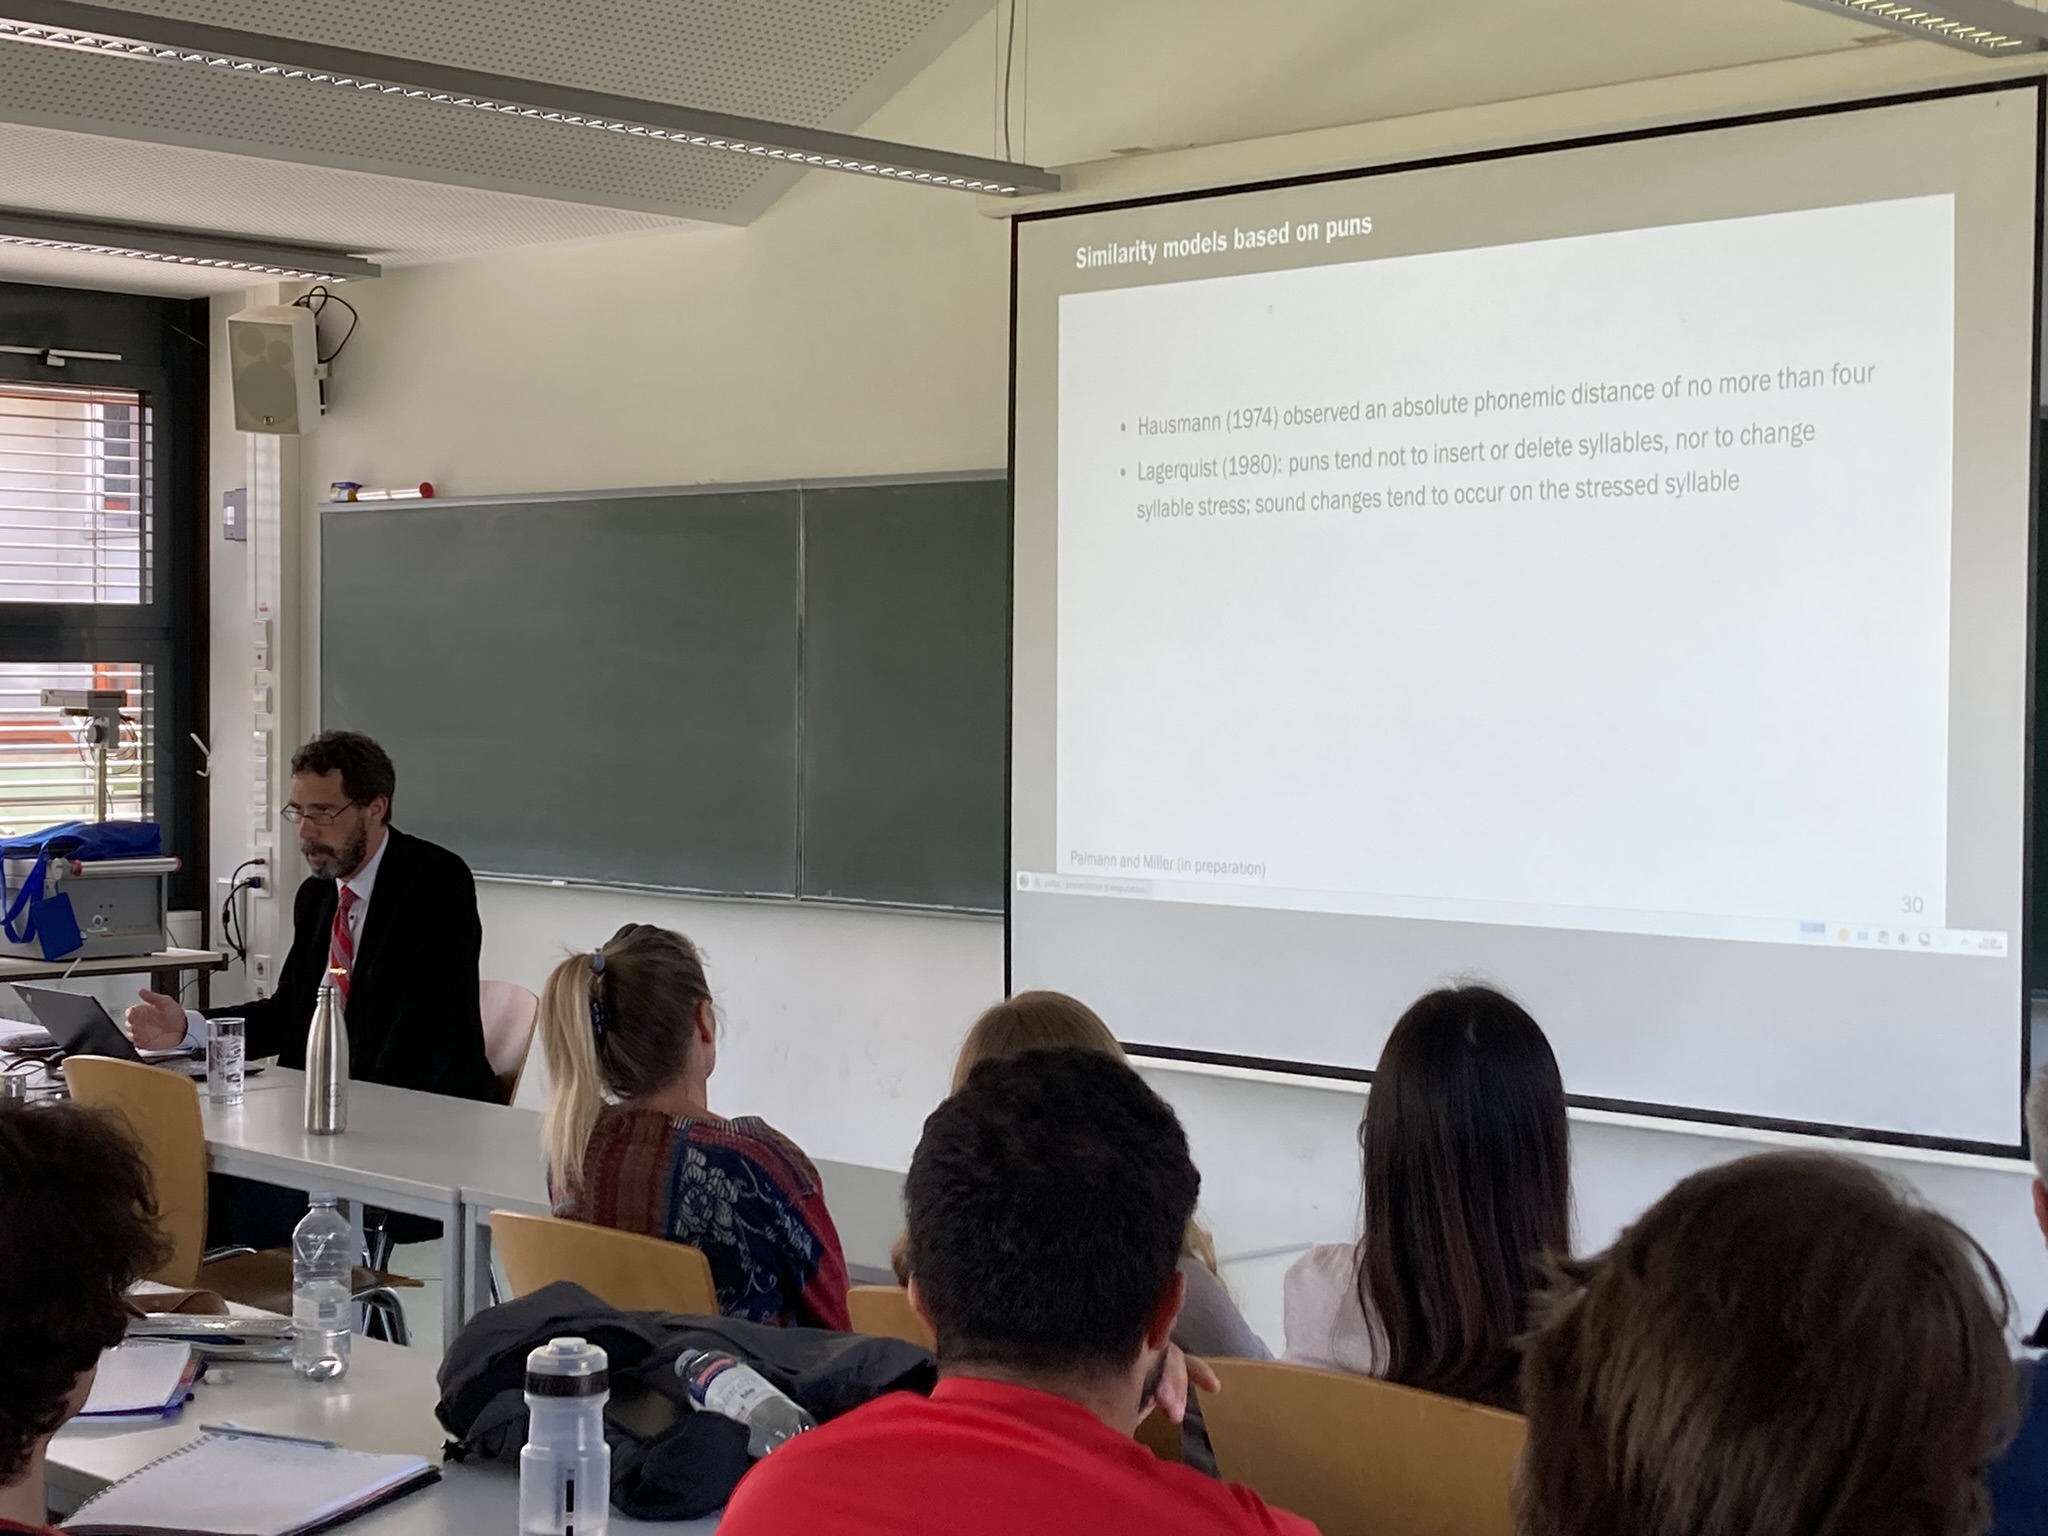 (A photograph of Tristan Miller speaking at the University of Konstanz)